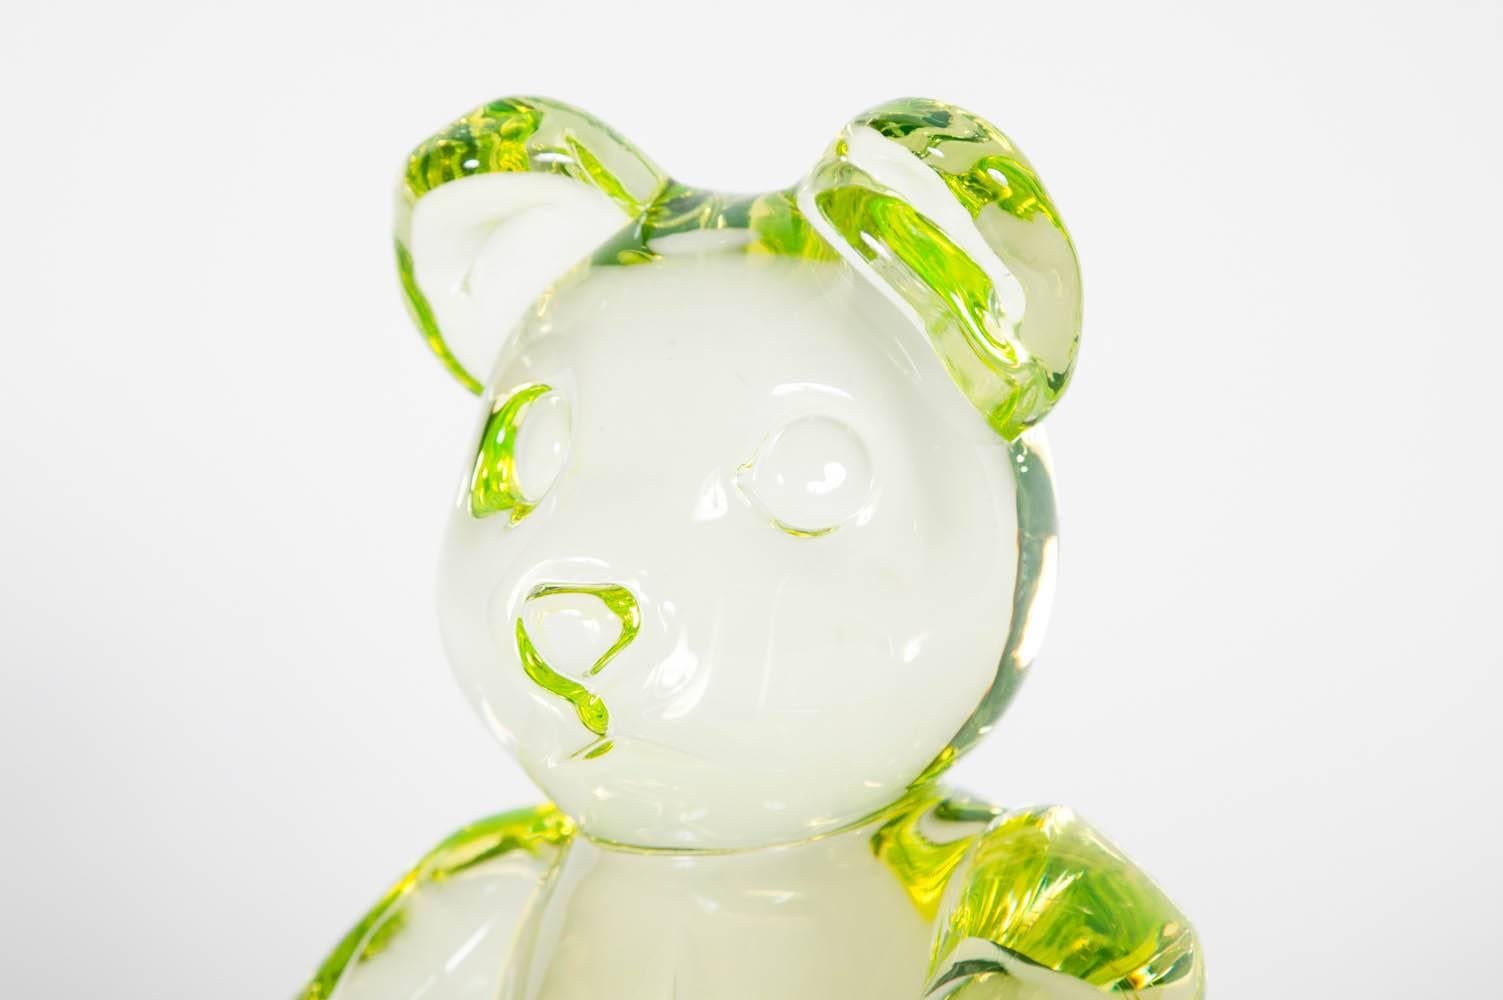 Bear is a unique lime green sculpture created from one mass of molten glass by the British artist Elliot Walker.

As one of a handful of glassblowers in the world who focus solely on a technique called 'Massello', it takes extreme dexterity, speed